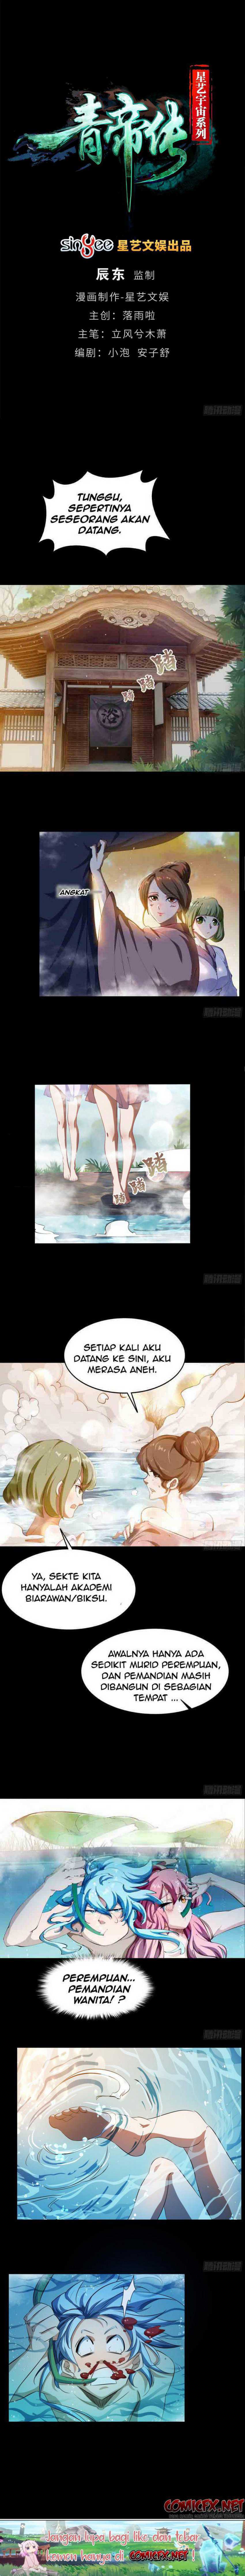 The Legend of Qing Emperor Chapter 059 bahasa indonesia